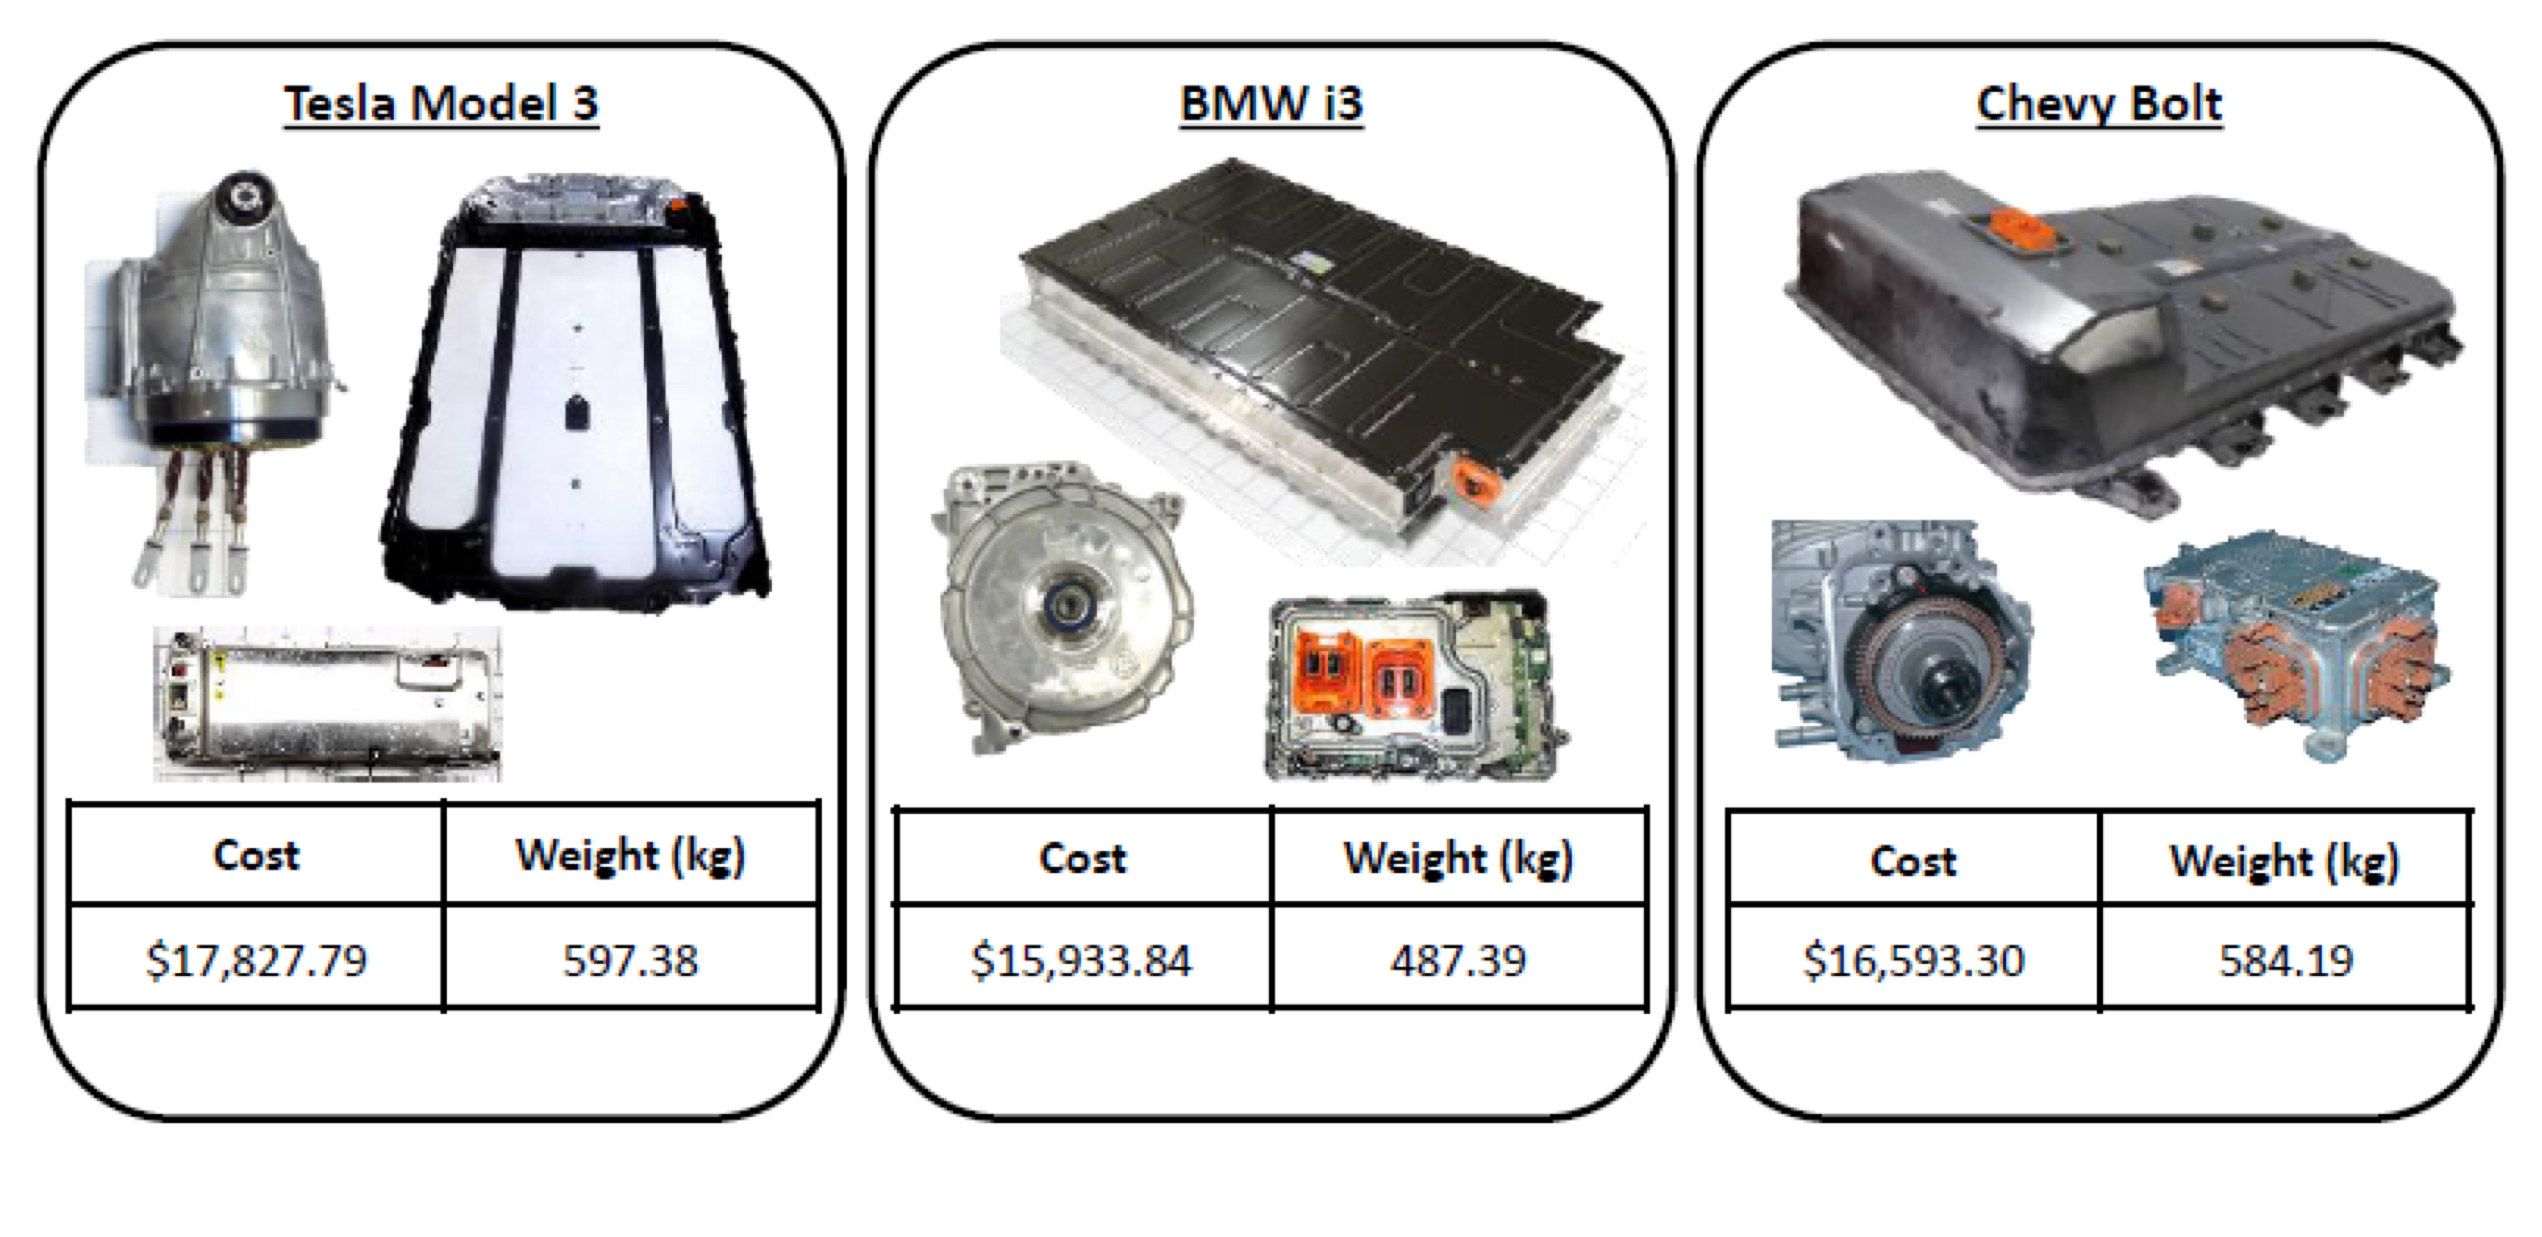 Figure 1. Side-by-side comparison of the powertrain and battery pack systems for the Tesla Model 3, BMW i3, and Chevy Bolt.